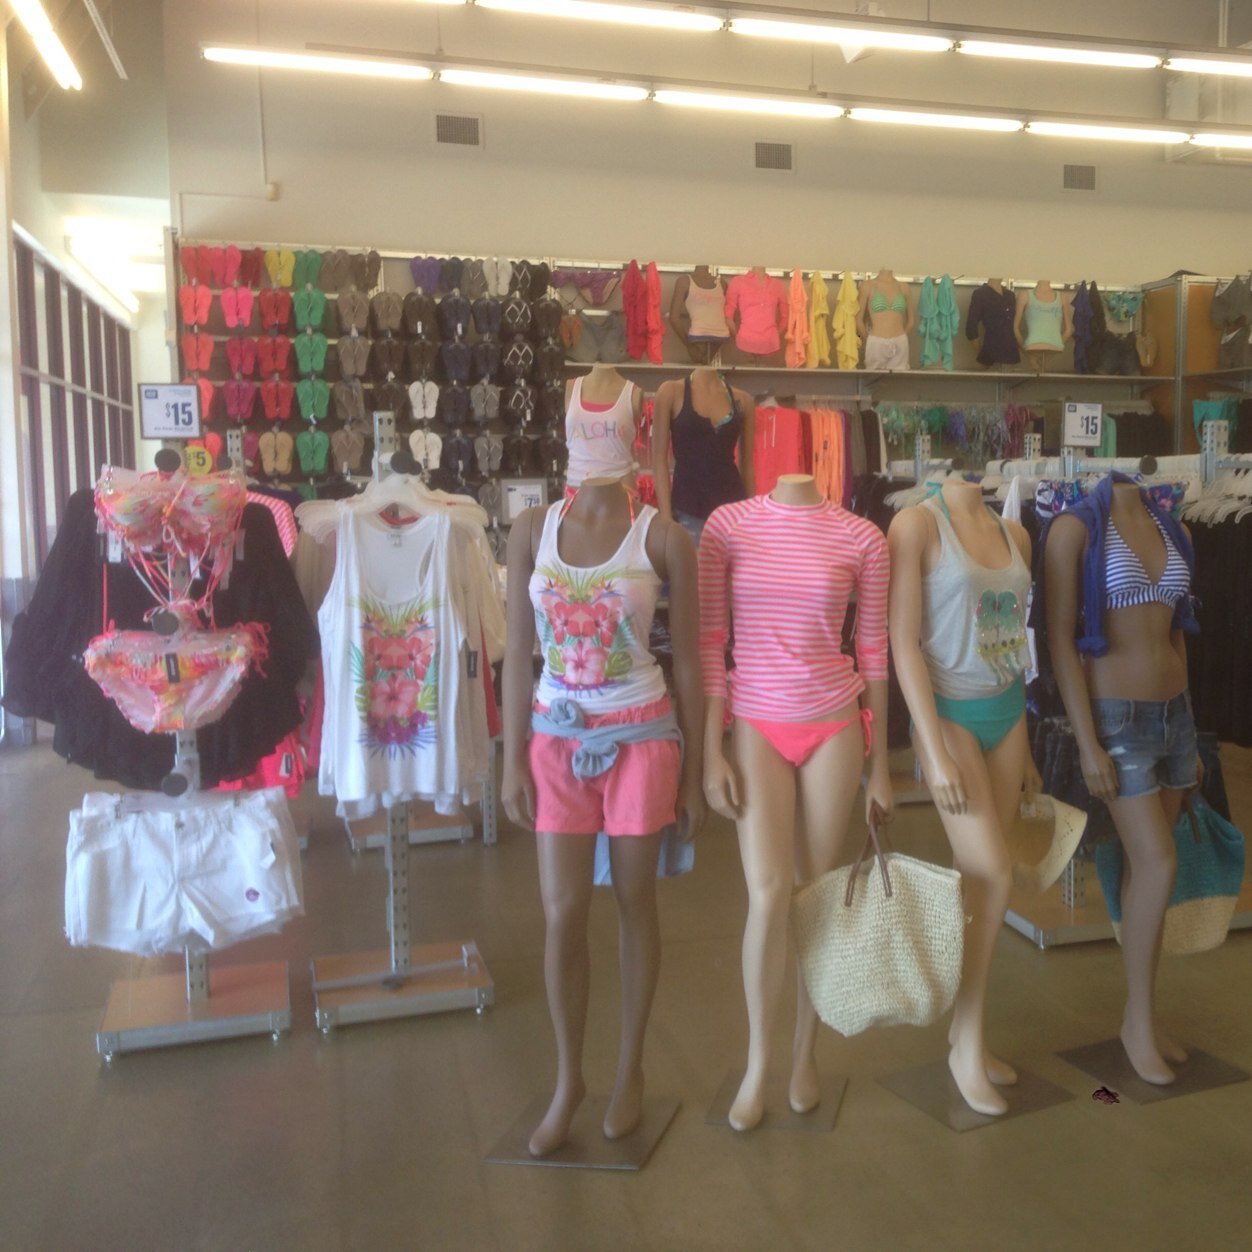 We are the official twitter account for the fabulous Old Navy at North Point in Alpharetta, GA.